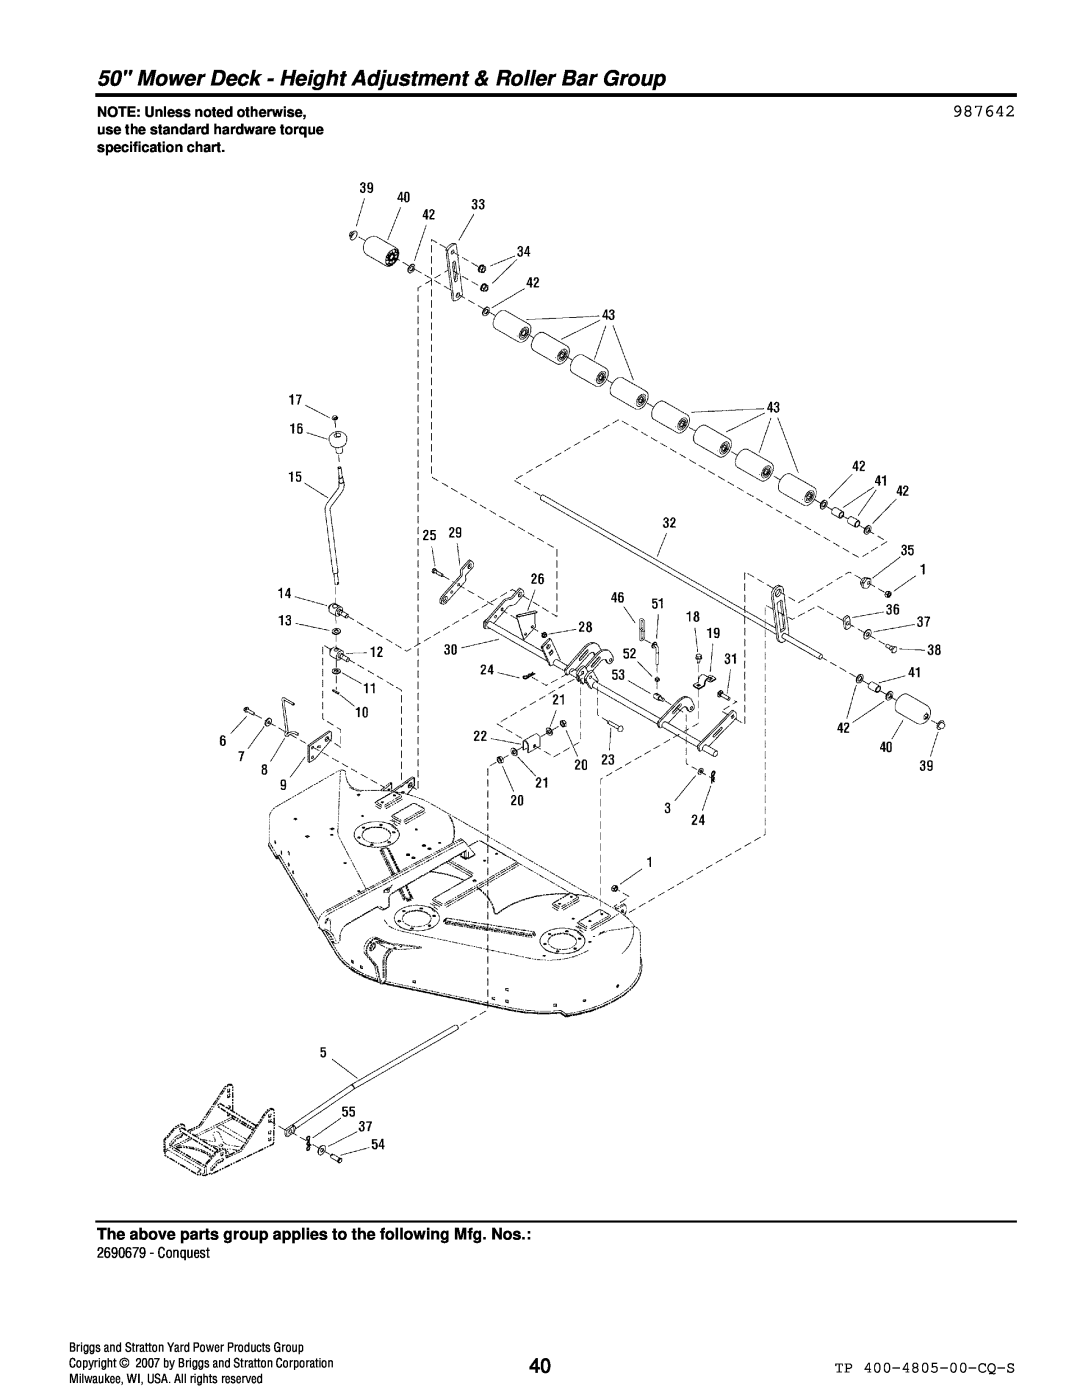 Simplicity 4WD Series manual 987642, NOTE: Unless noted otherwise, Conquest, Briggs and Stratton Yard Power Products Group 